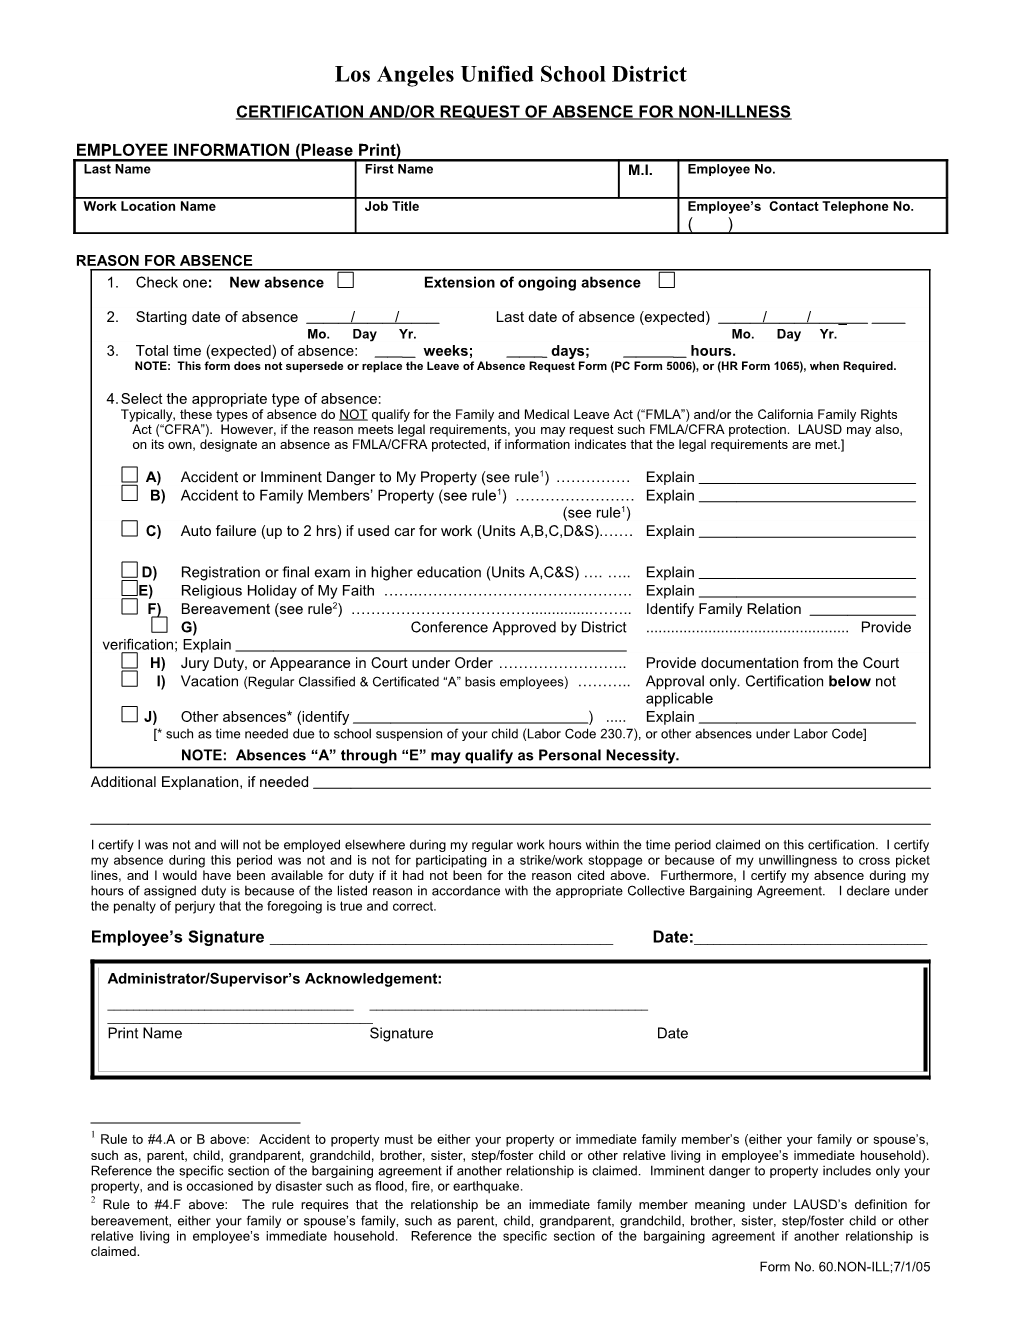 Appendix D: Request for Absence/Certification of Absence (Illness, Injury, New Child)